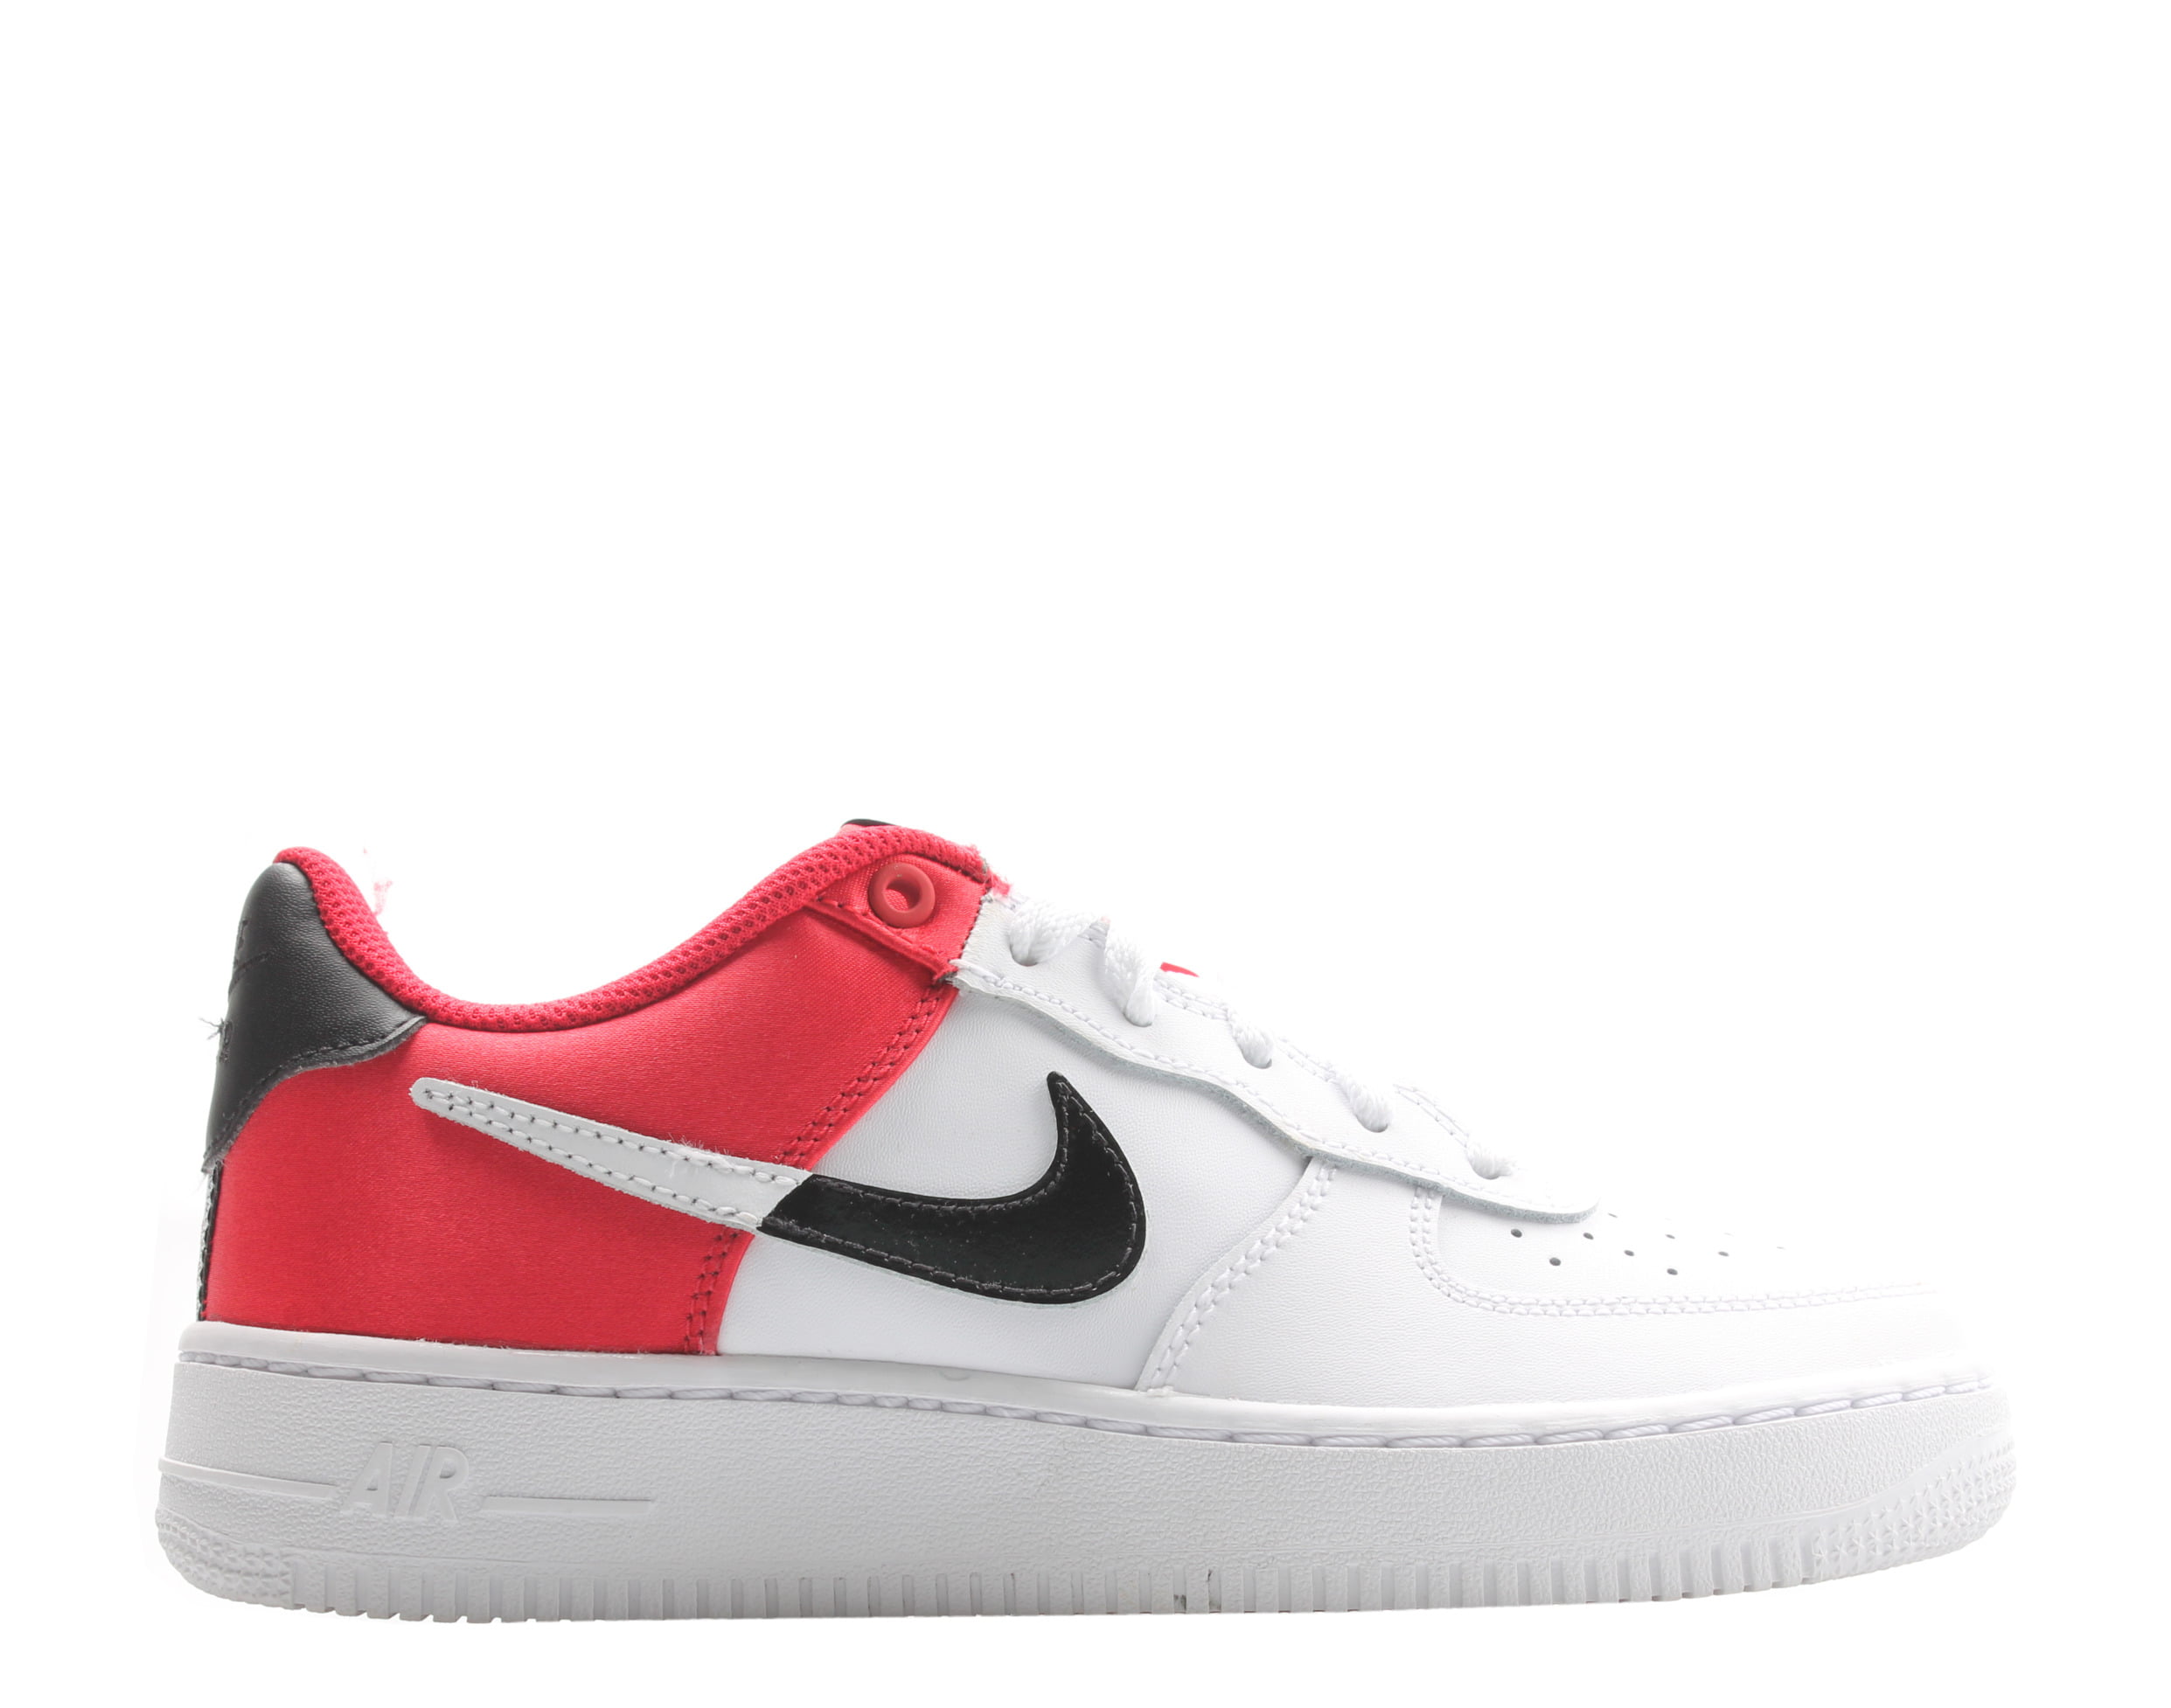 Nike Kids Air Force 1 Lv8 GS Red Satin Basketball Shoe (6